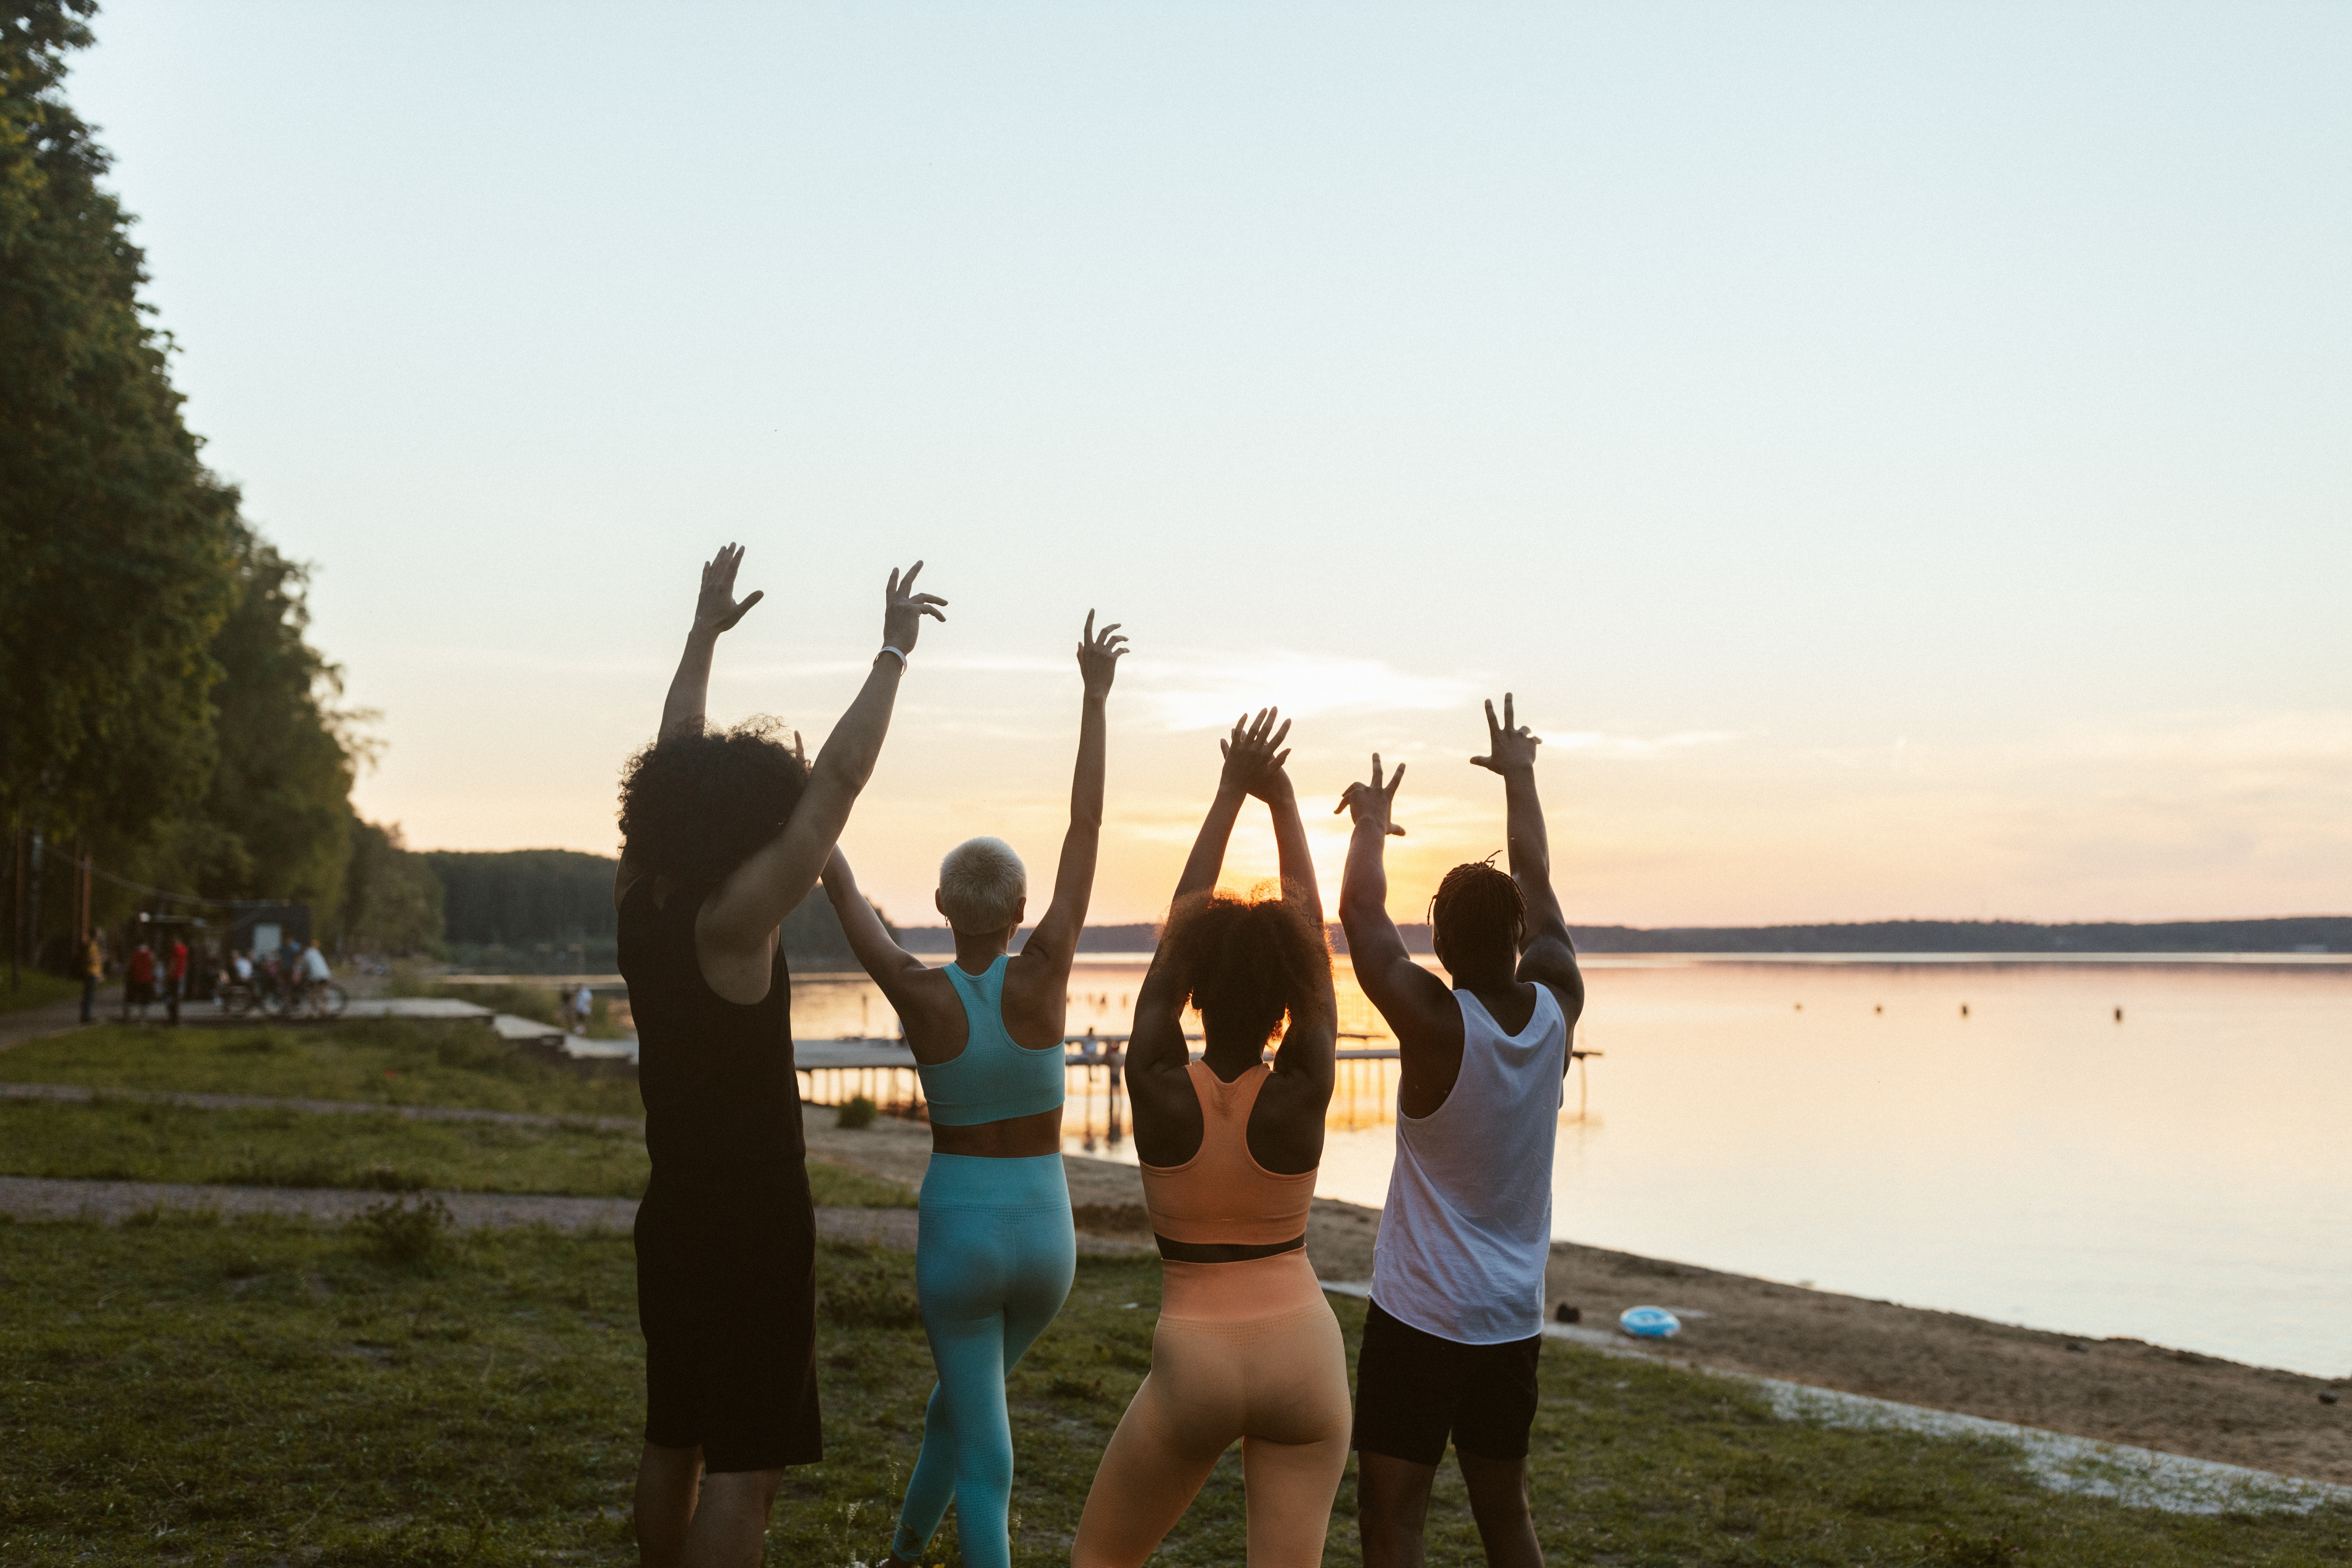 Four young people on grass at sunset looking out over a lake. They have their arms up in the air with their backs to the camera.